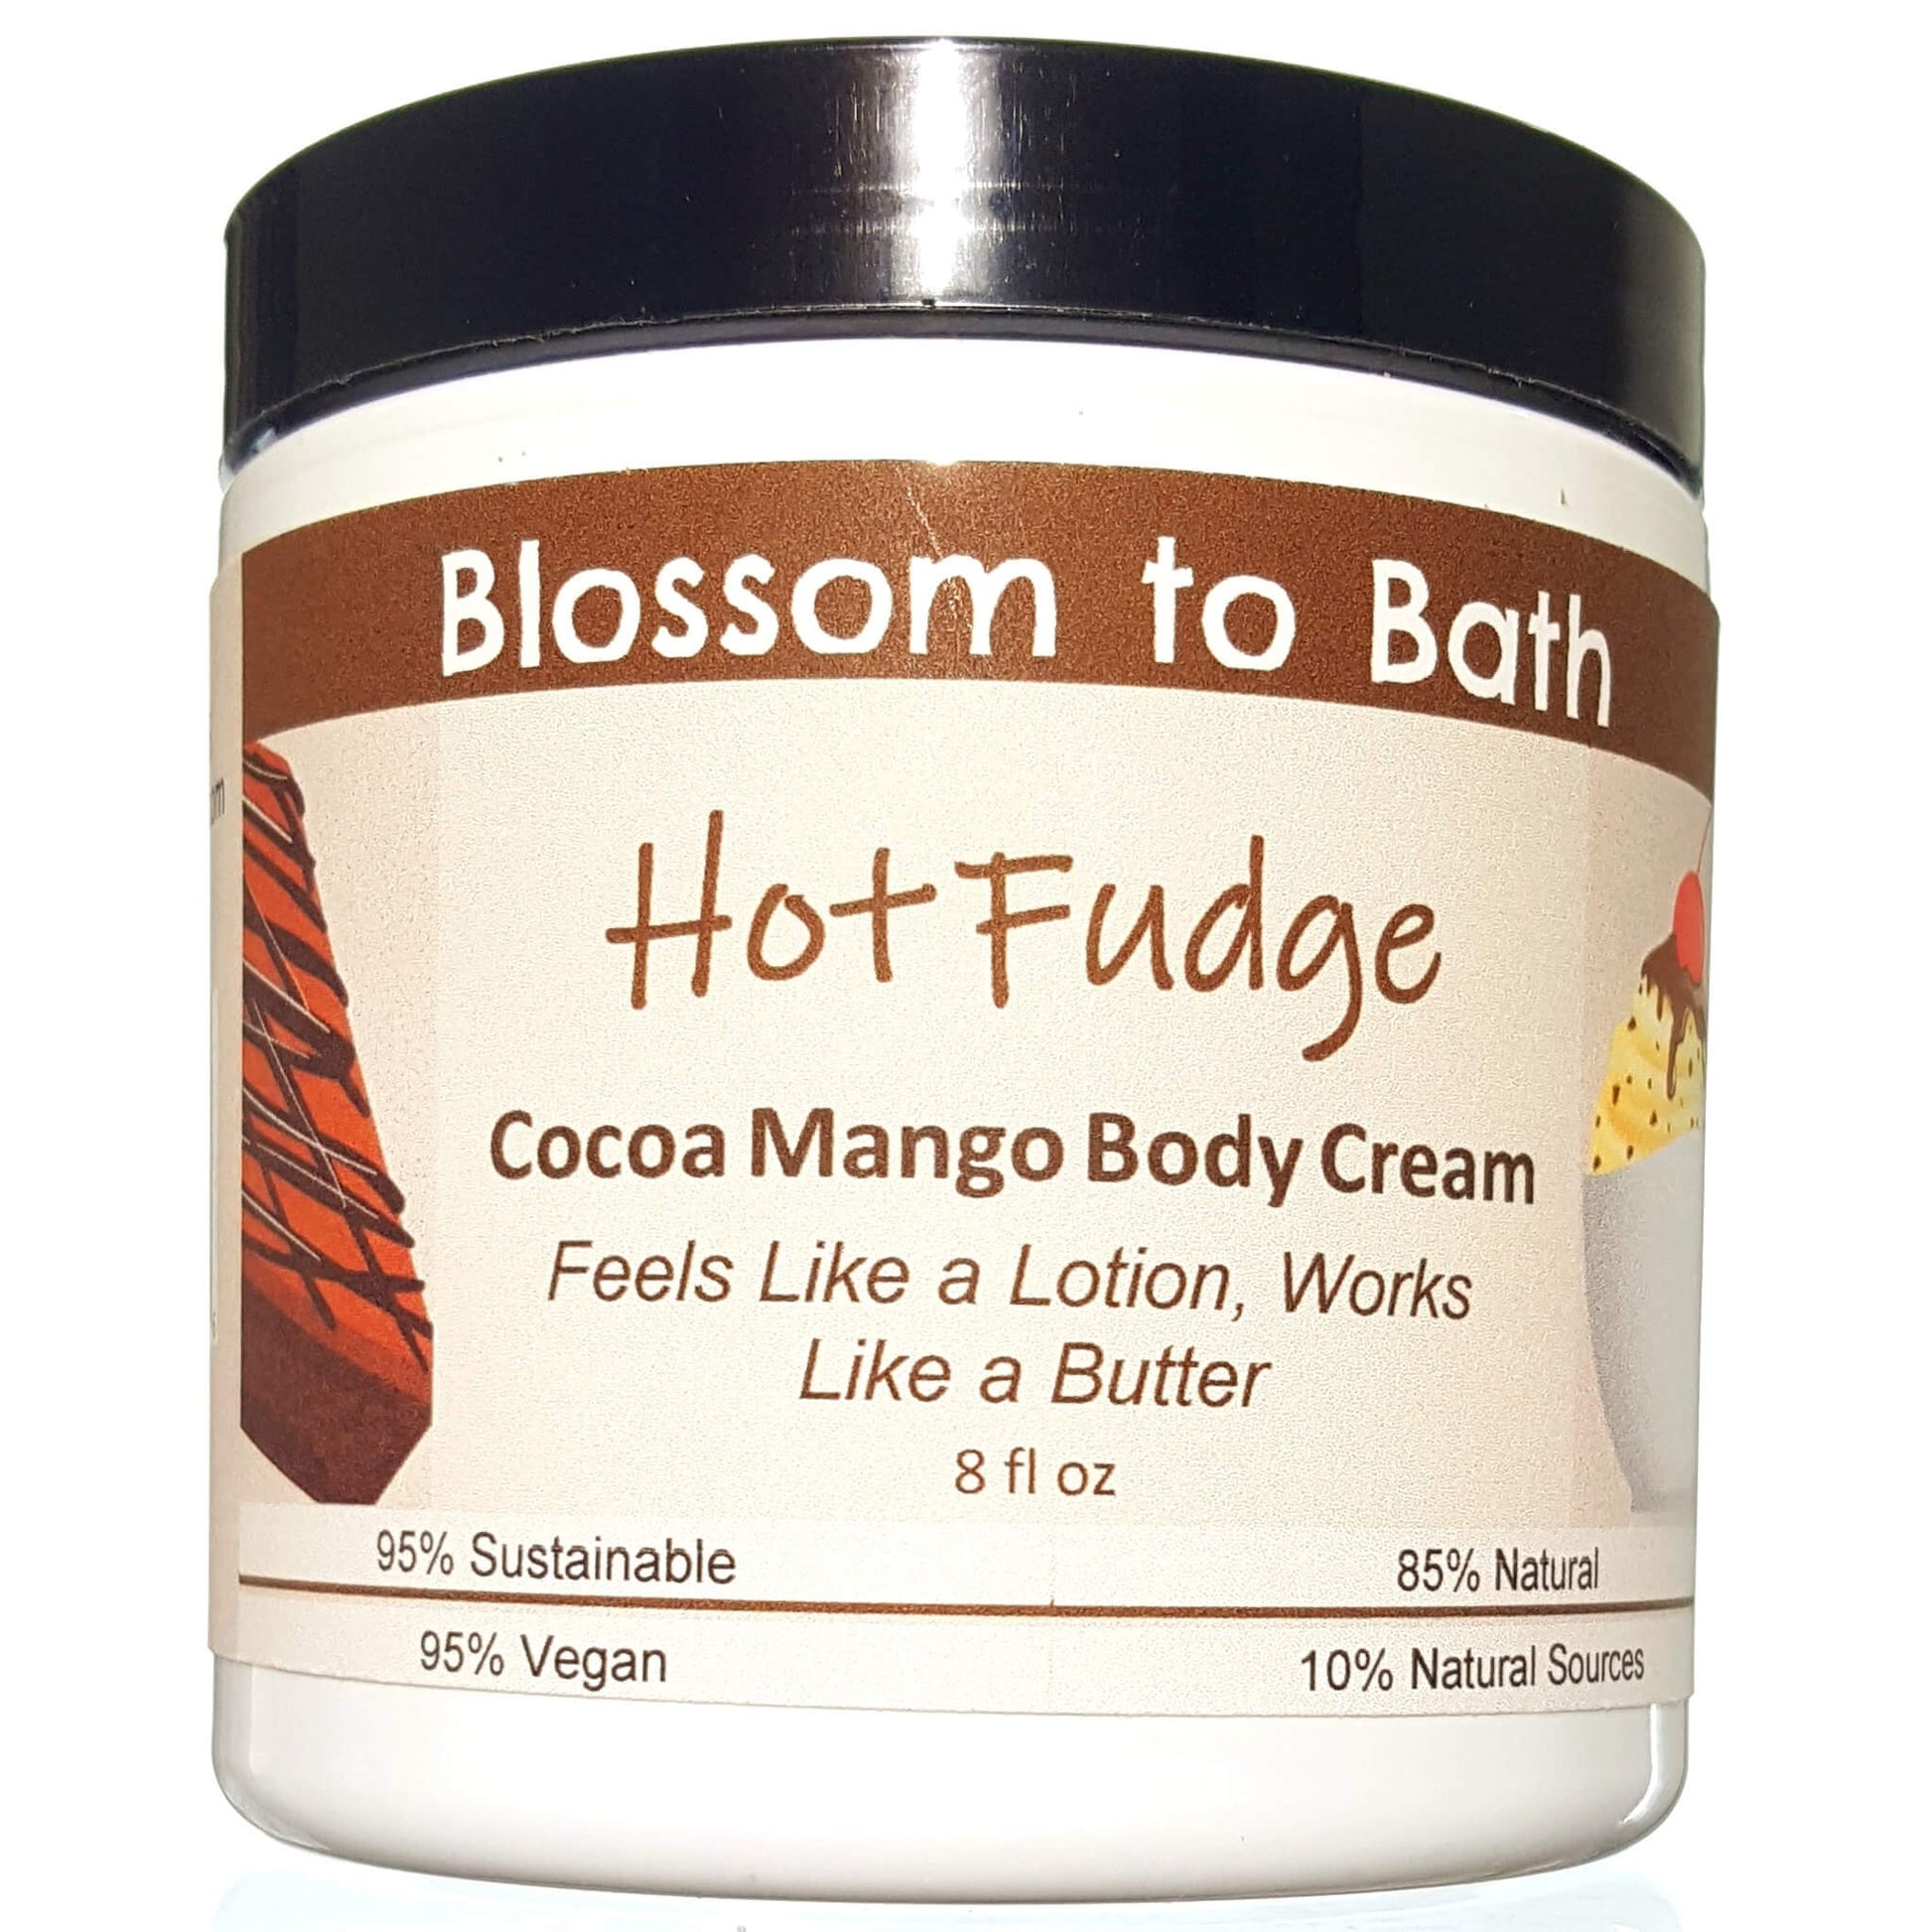 Buy Blossom to Bath Hot Fudge Cocoa Mango Body Cream from Flowersong Soap Studio.  Rich organic butters  soften and moisturize even the roughest skin all day  The fragrance is three layers deep in rich chocolate.